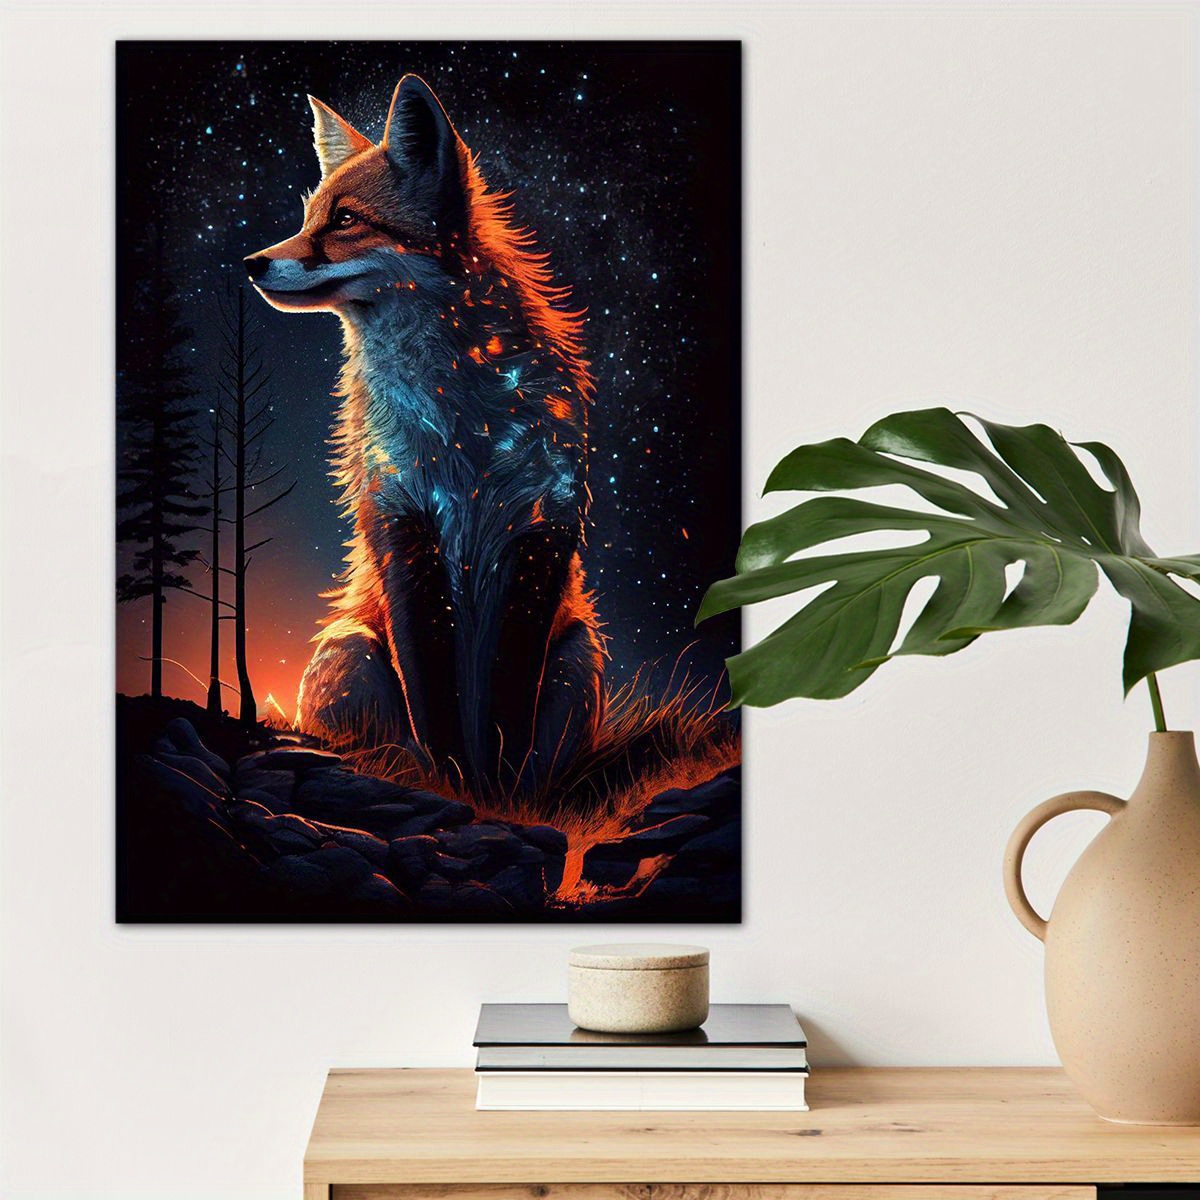 

1pc Lighting Fox Poster Canvas Wall Art For Home Decor, Animal Lovers Poster Wall Decor High Quality Canvas Prints For Living Room Bedroom Kitchen Office Cafe Decor, Perfect Gift And Decoration